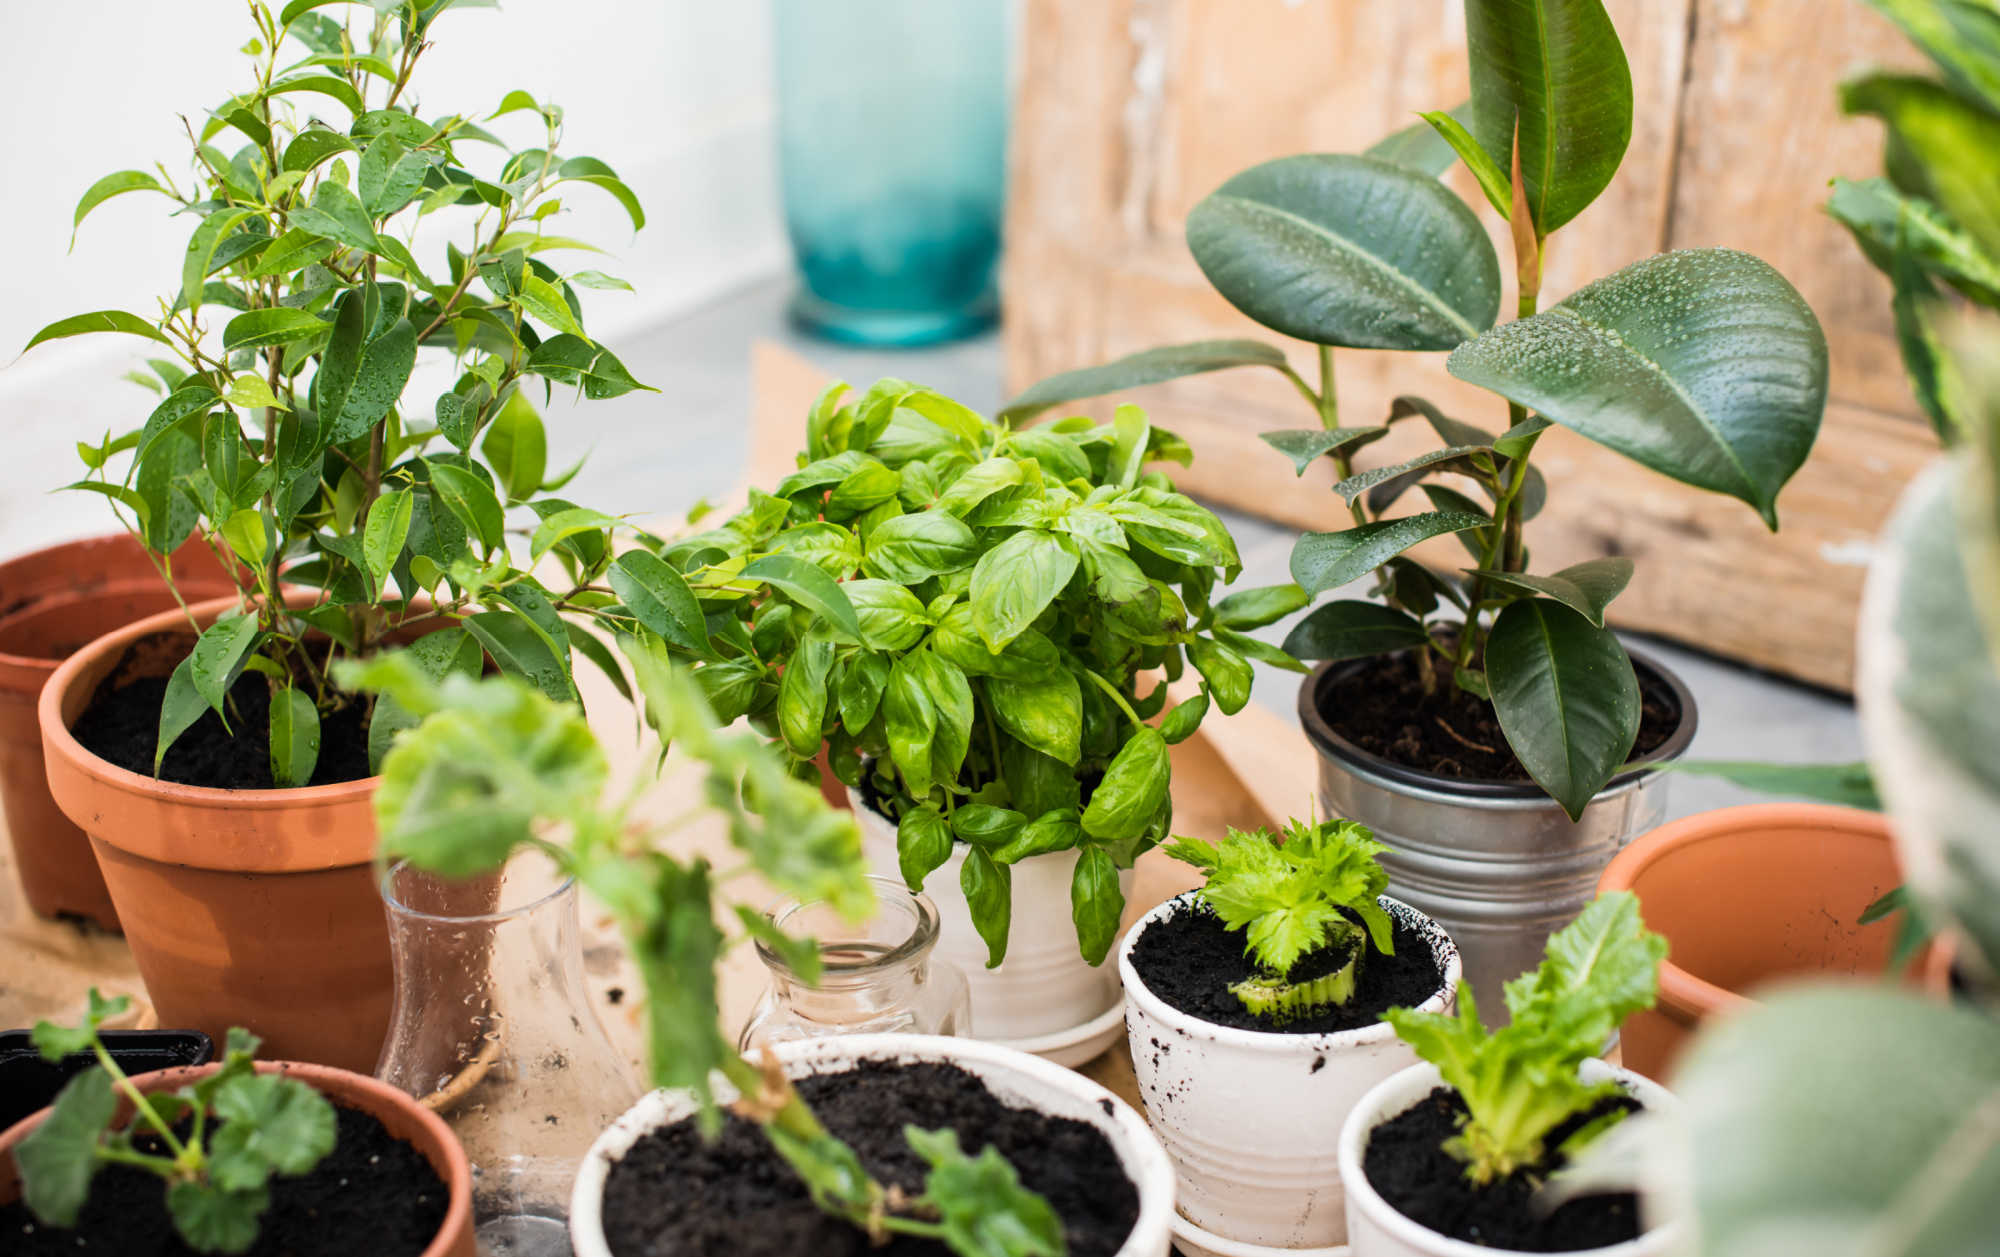 How to Start an Herb Garden: Tips for First-Time Gardeners